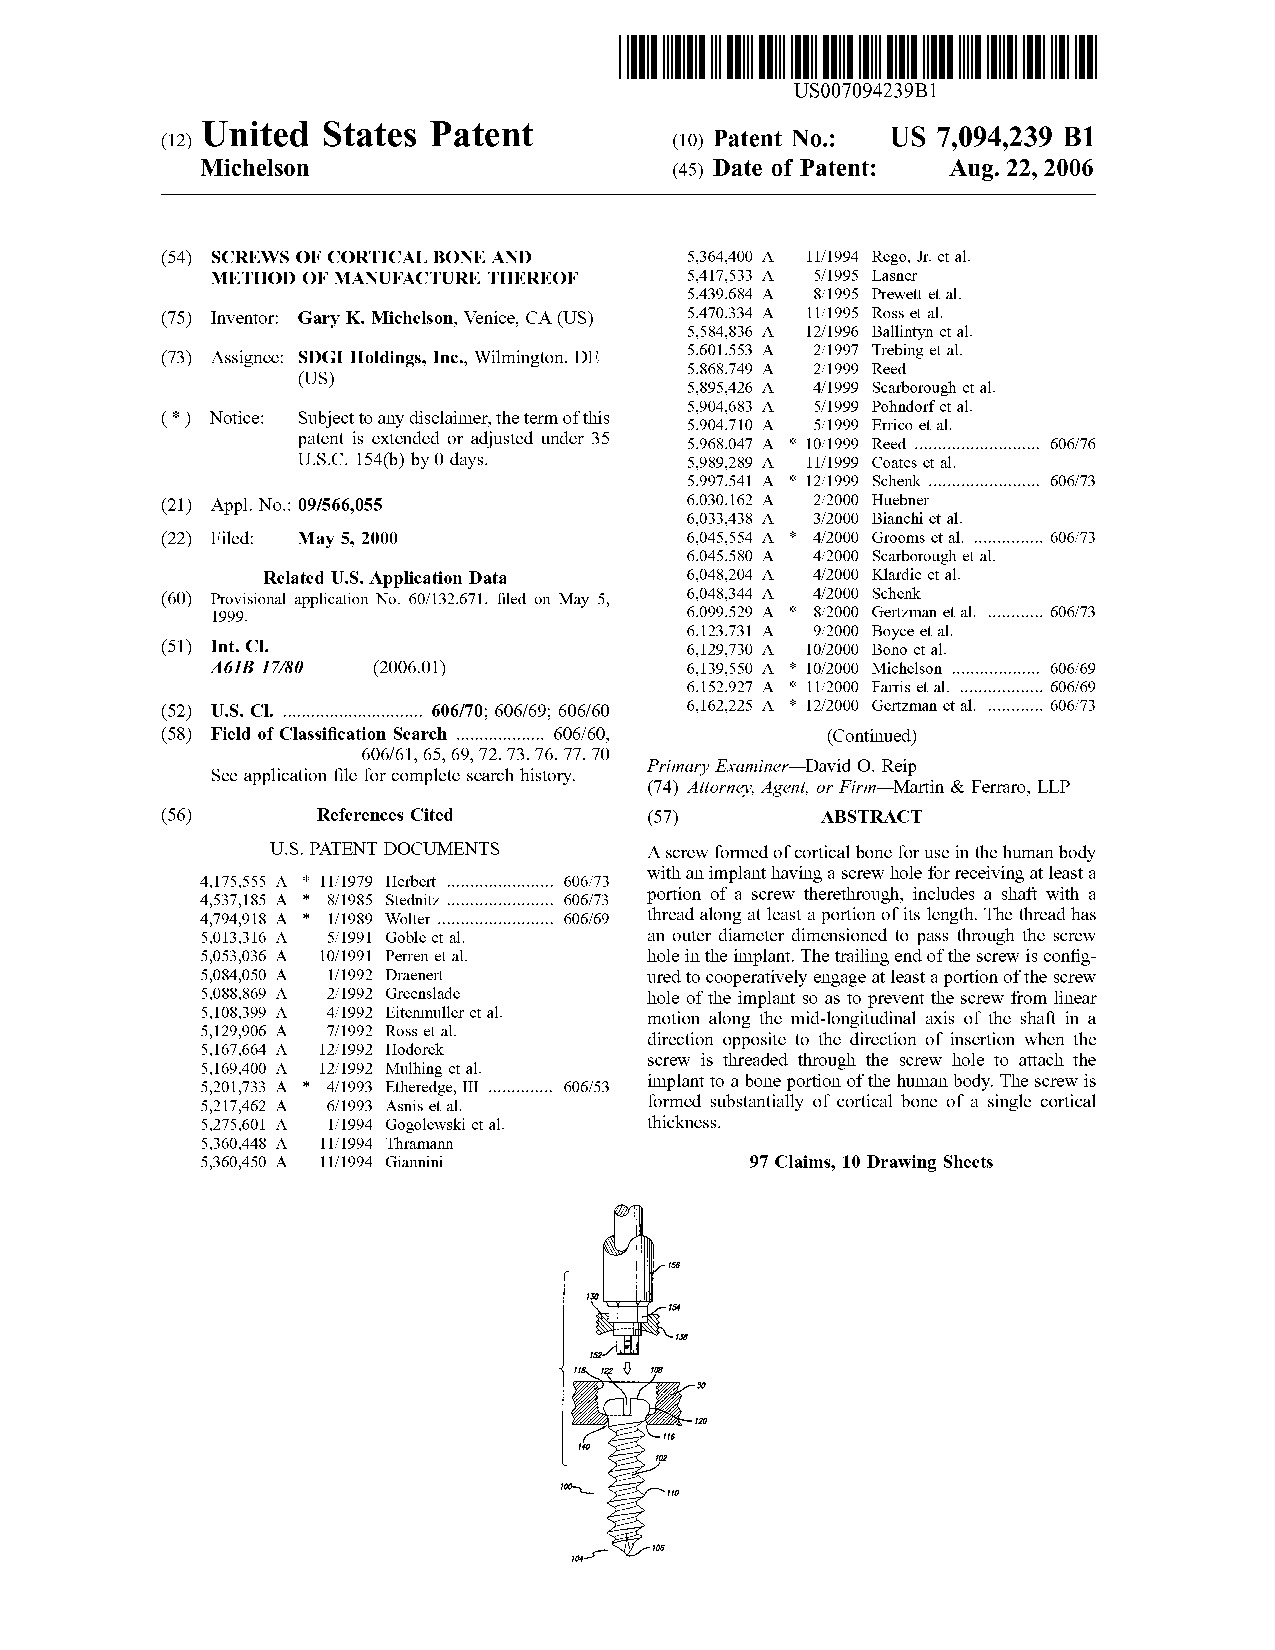 Screws of cortical bone and method of manufacture thereof - Patent 7,094,239